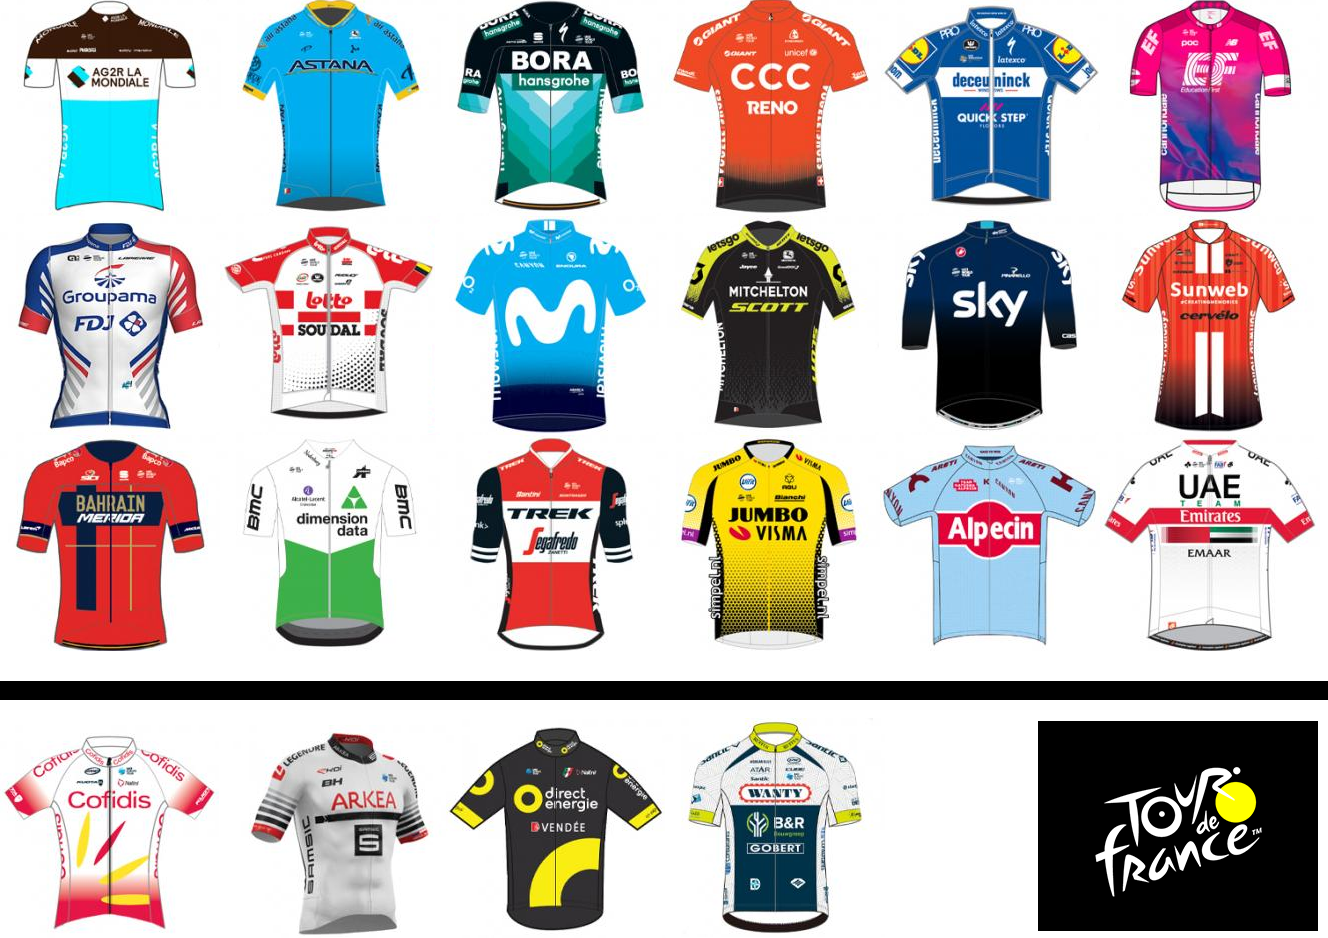 ventilator fravær grinende The last wildcards have been announced, here are the teams which will  participate in the Tour de France 2019 :: Blog :: velowire.com :: (photos,  videos + actualités cyclisme)